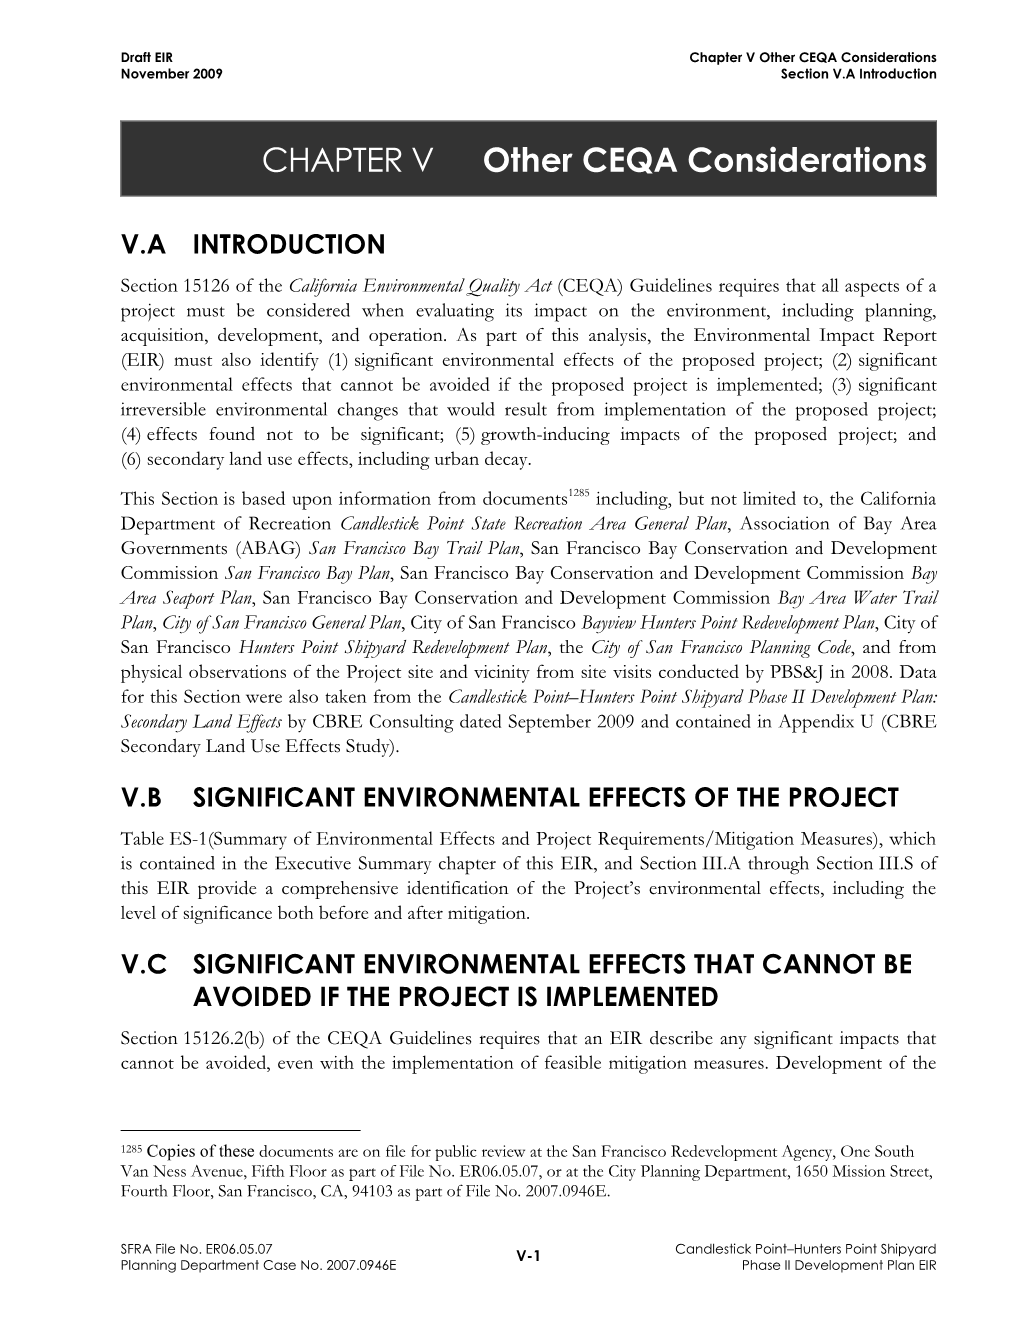 Chapter V Other CEQA Considerations November 2009 Section V.A Introduction